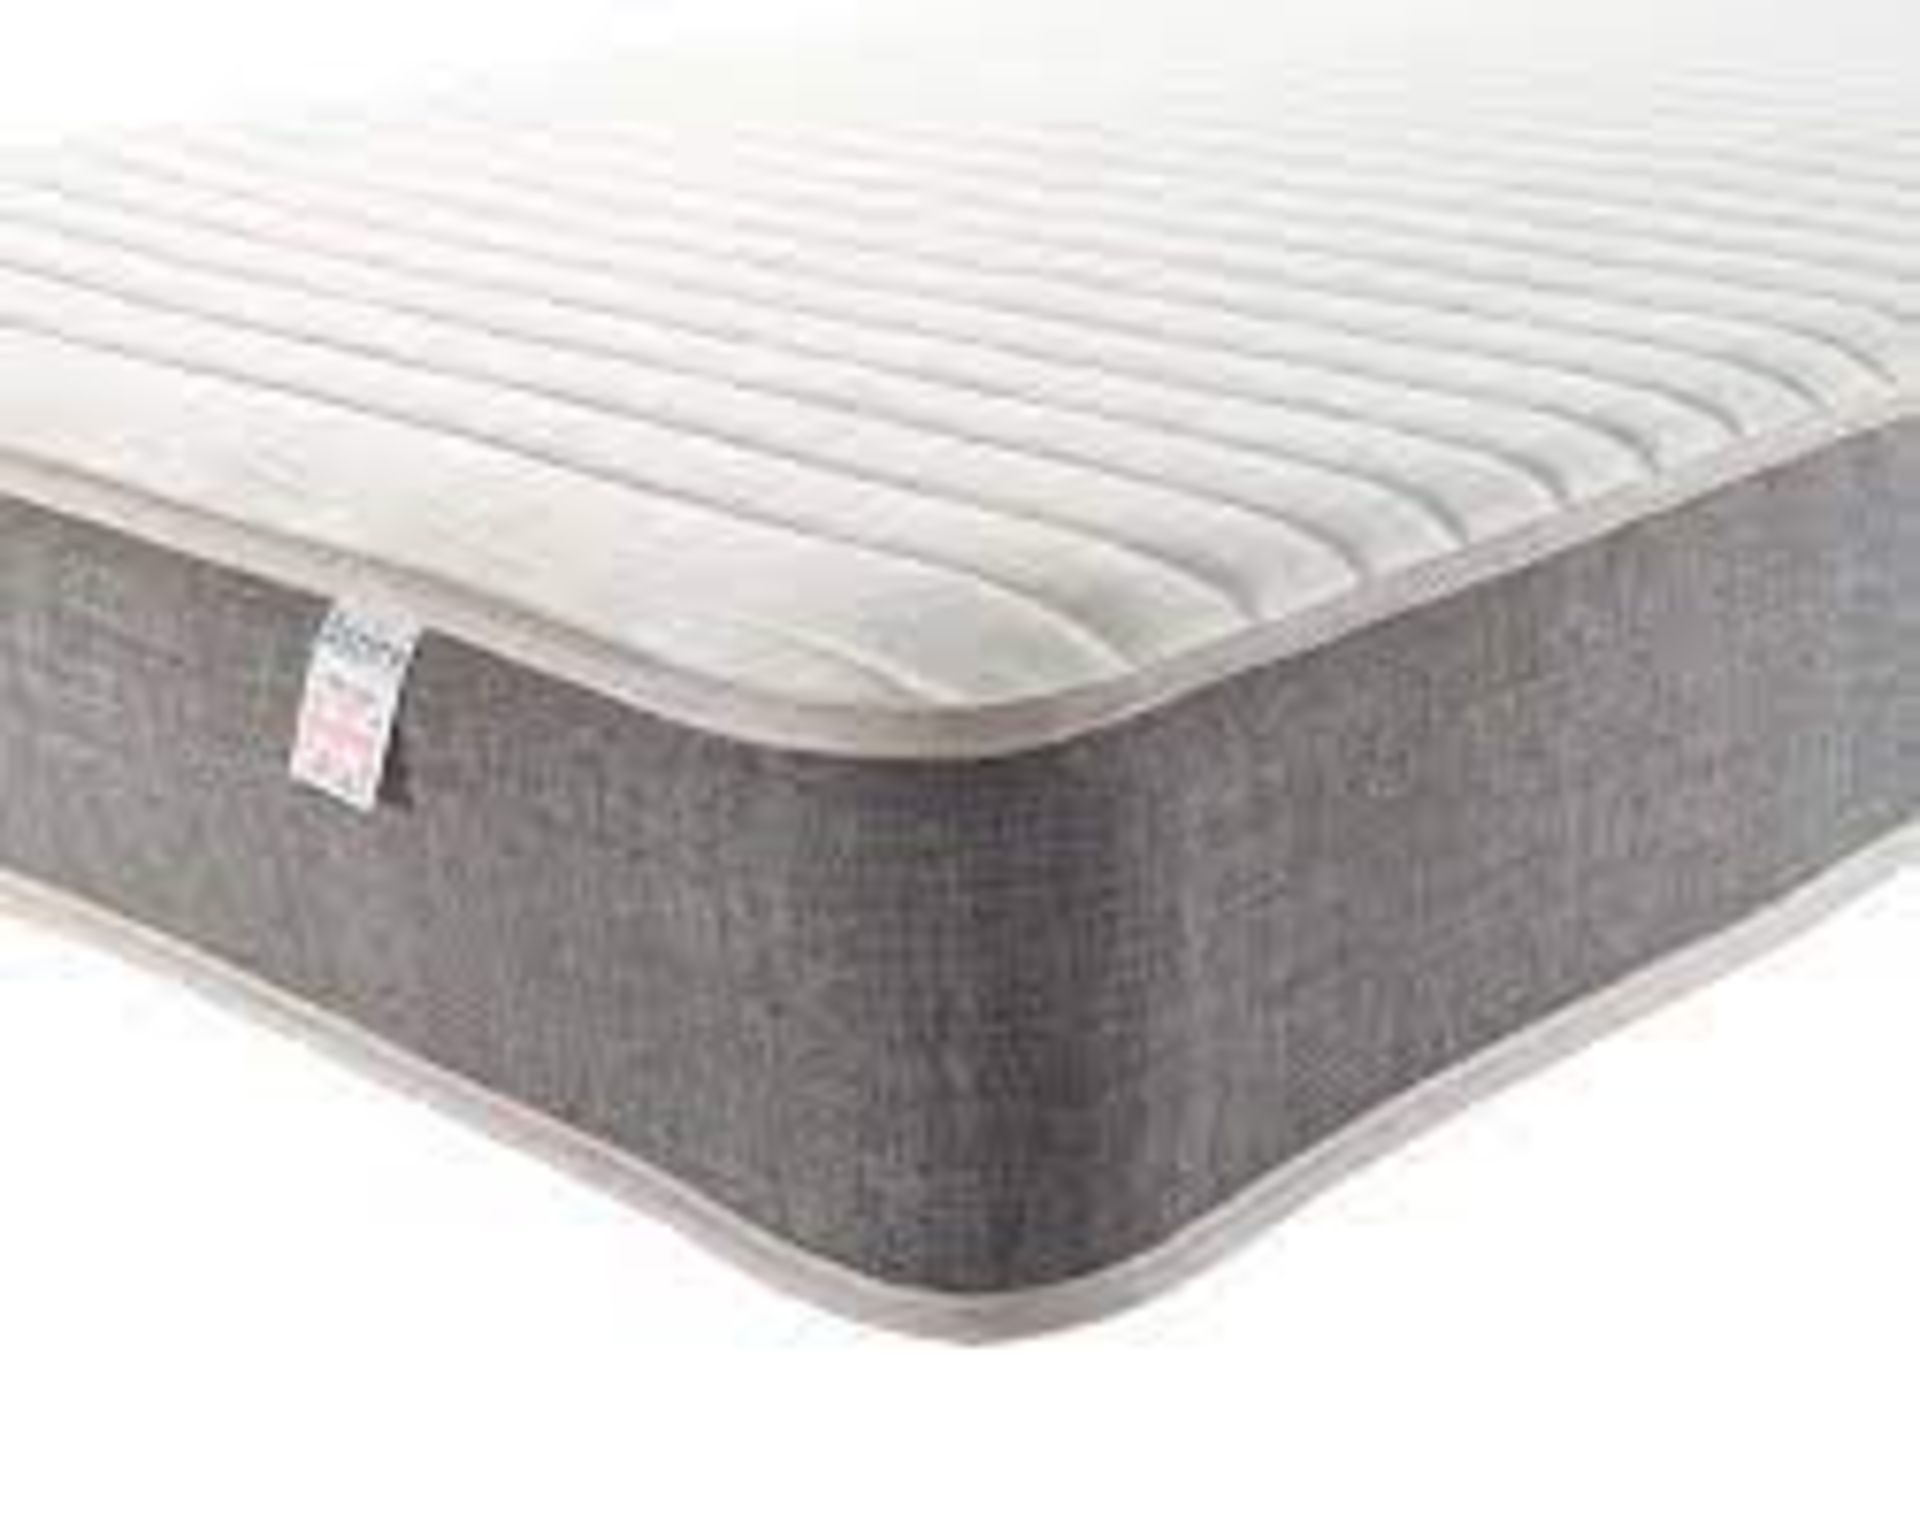 Pocket+ 1000 Memory Mattress. A high value, high quality mattress with a medium comfort rating which